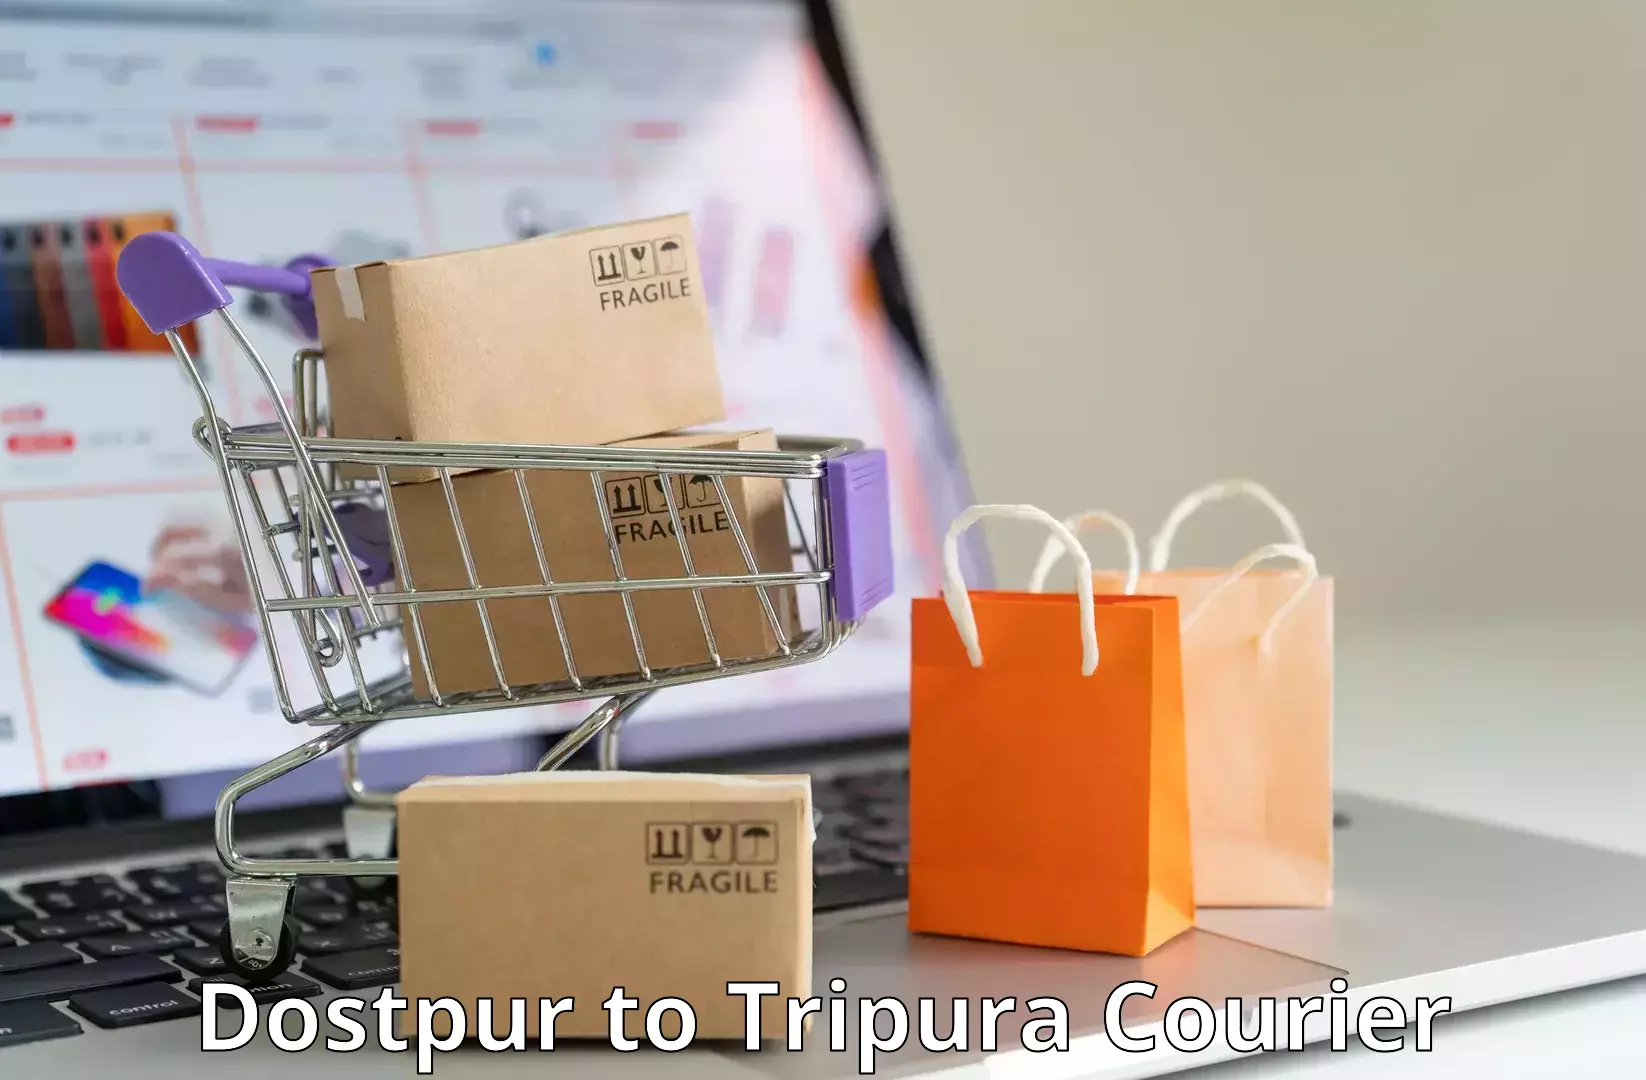 Same-day delivery solutions Dostpur to Tripura